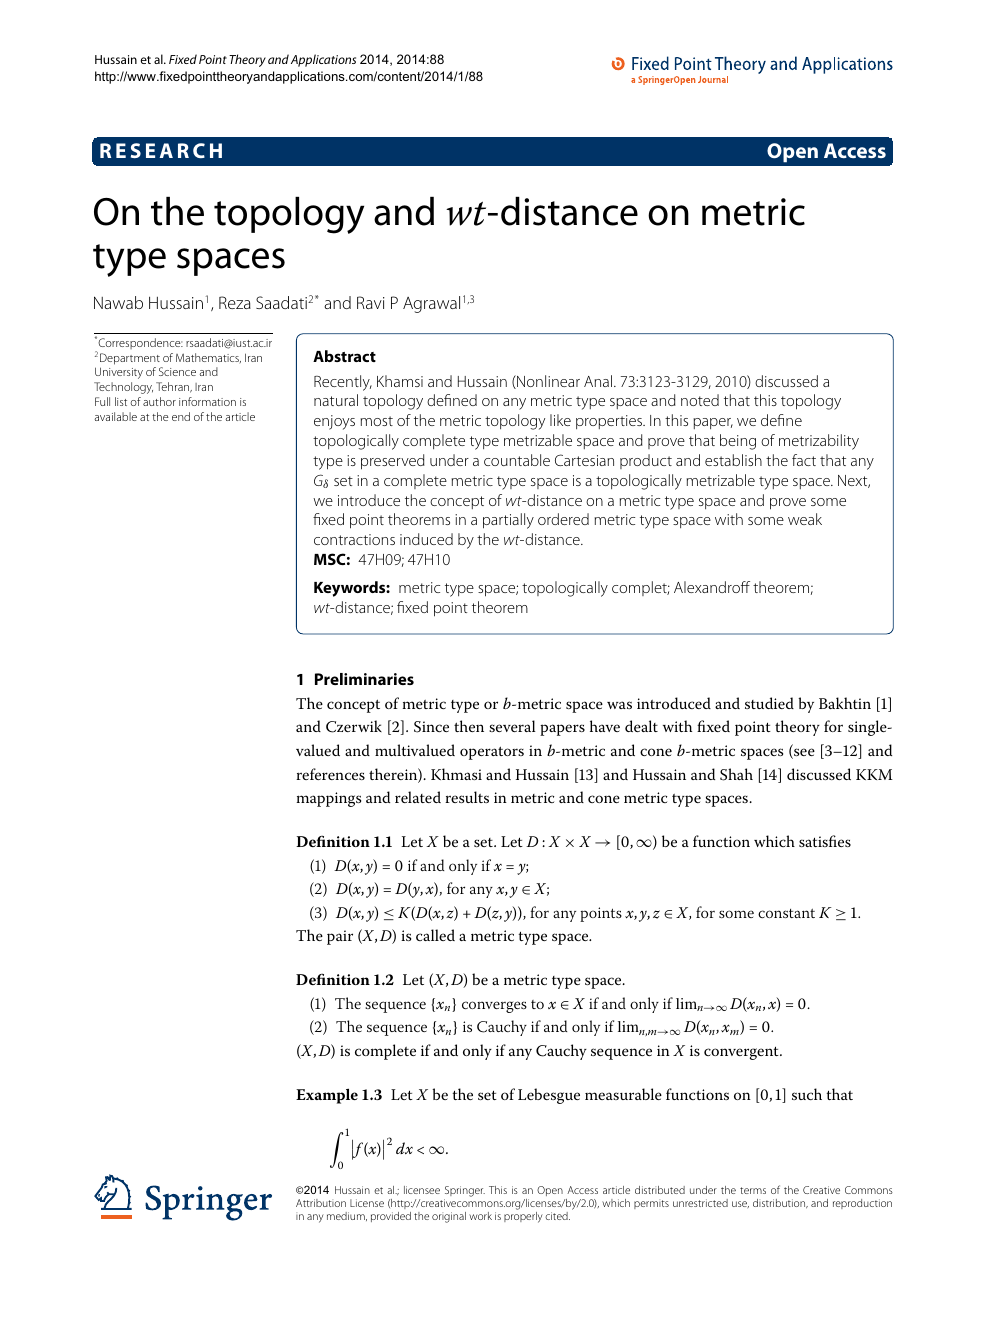 On The Topology And Wt Distance On Metric Type Spaces Topic Of Research Paper In Mathematics Download Scholarly Article Pdf And Read For Free On Cyberleninka Open Science Hub